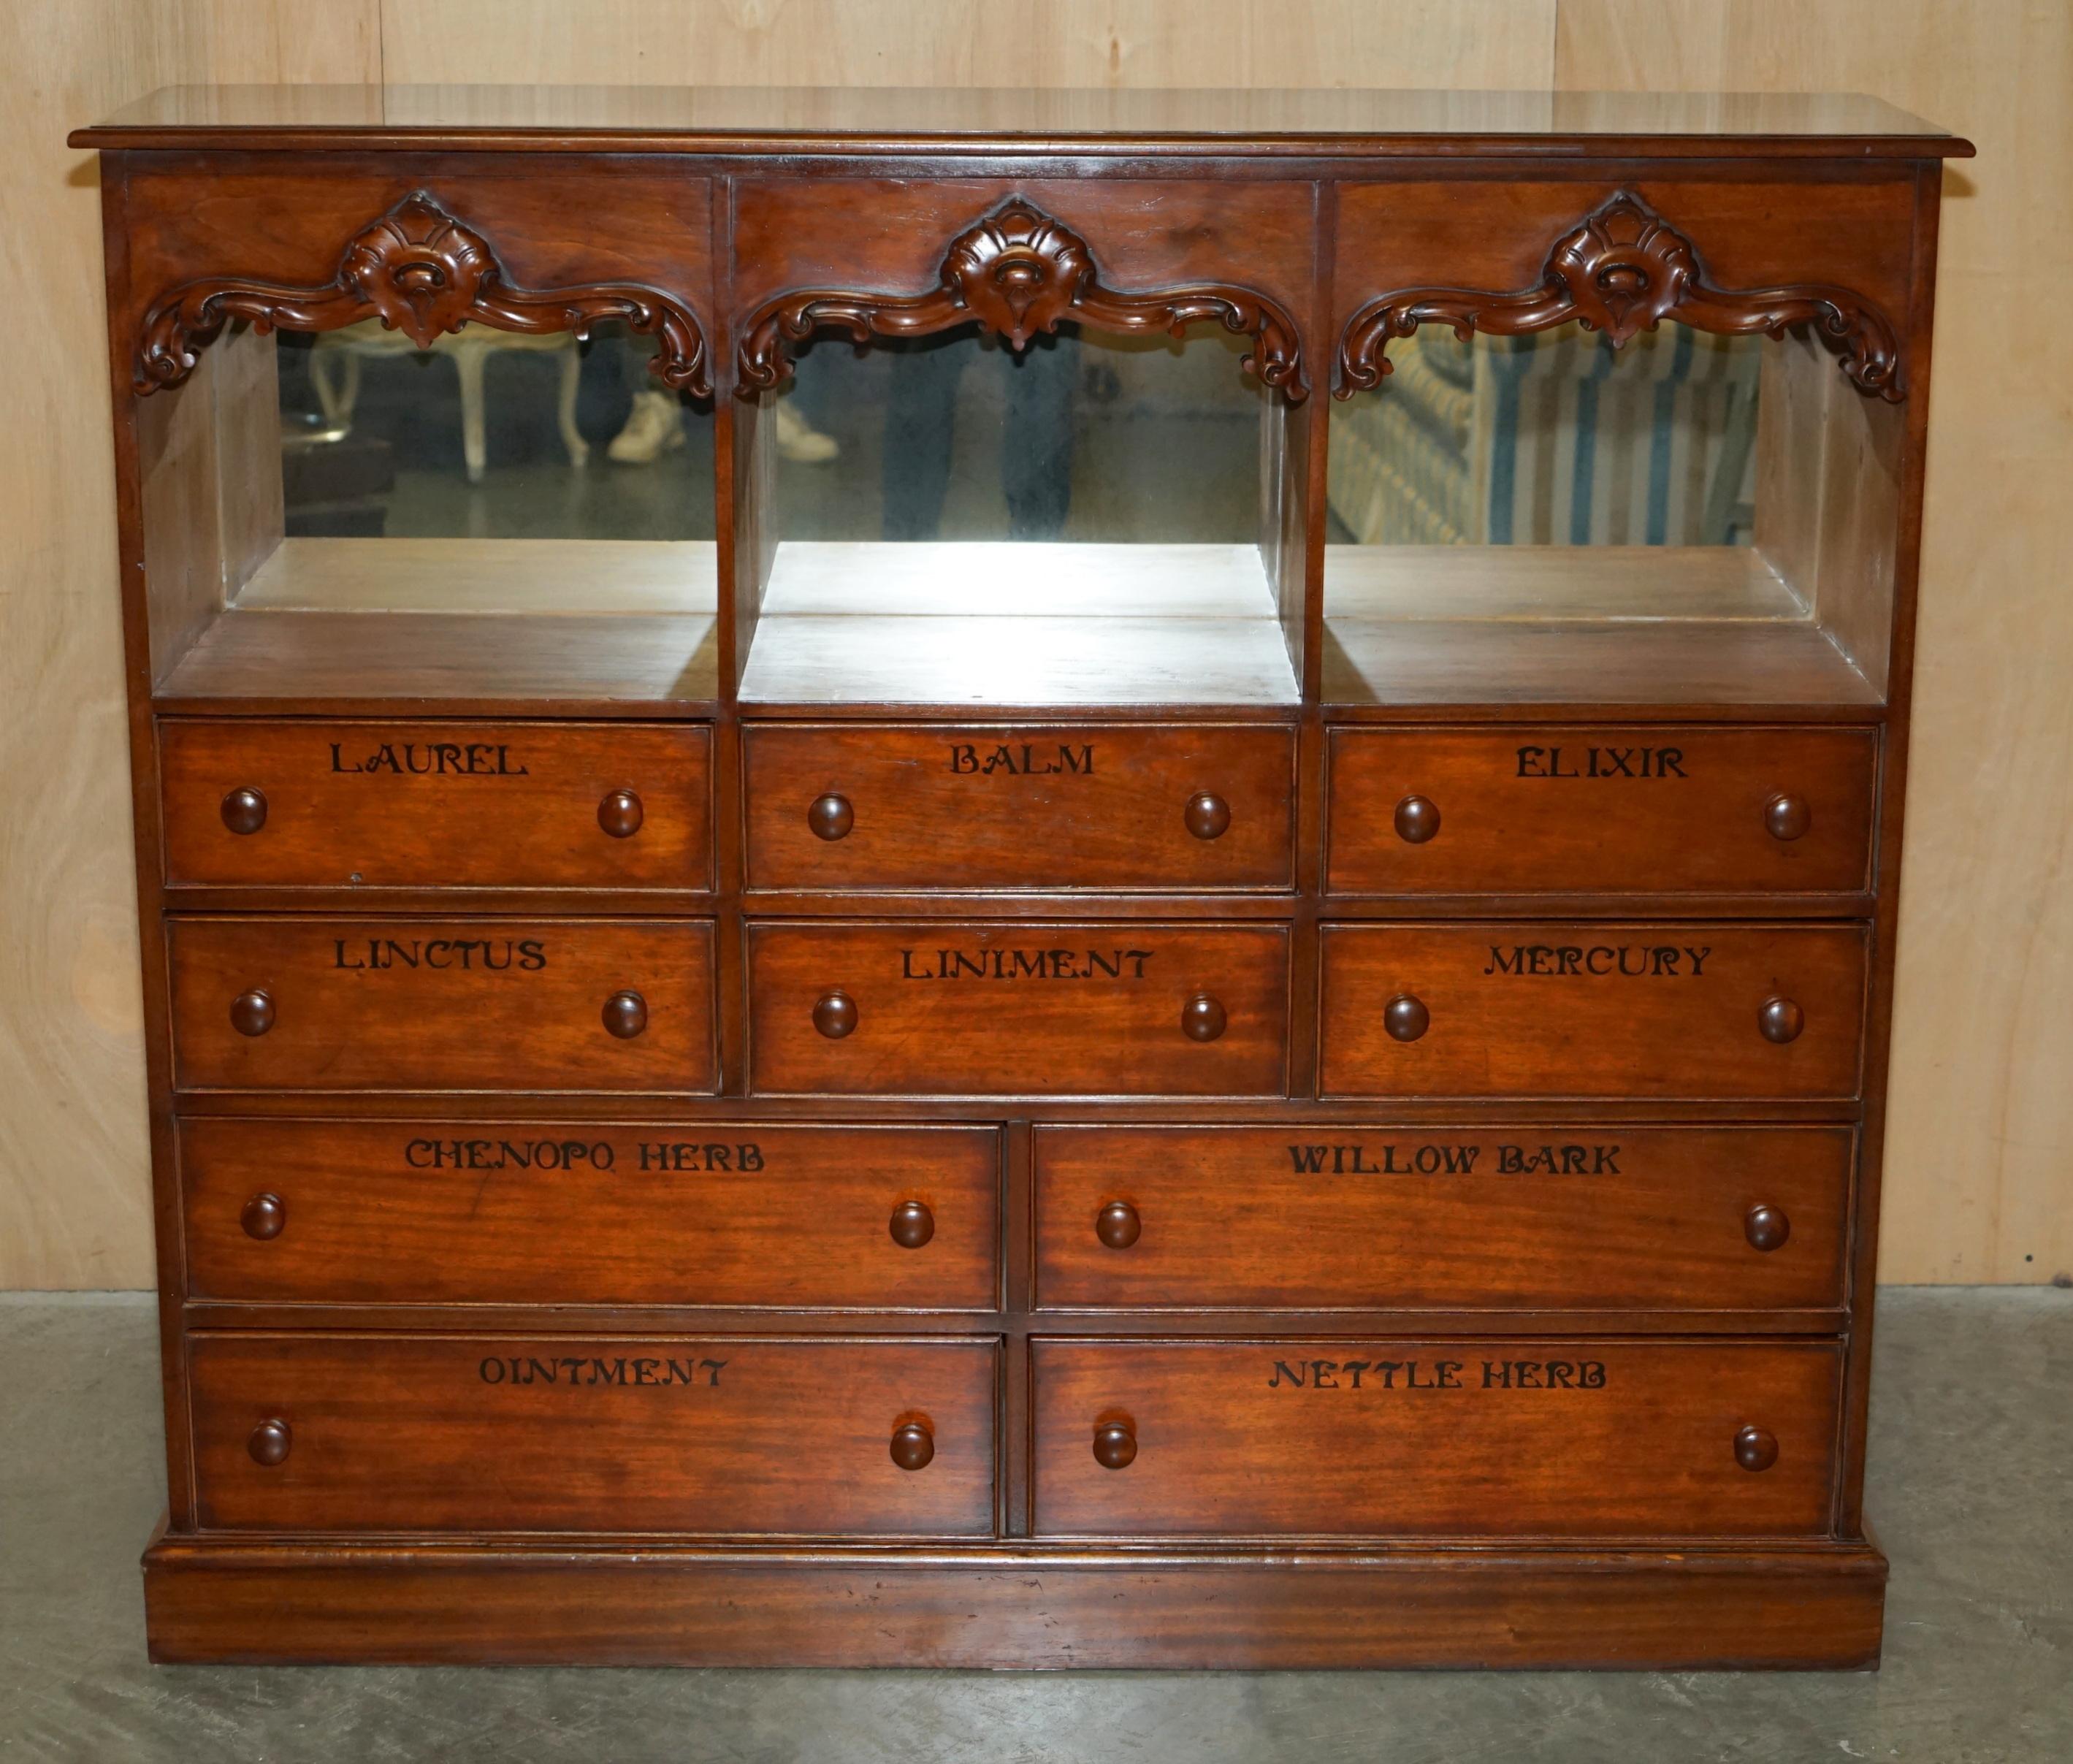 Victorian ANTIQUE VICTORIAN FLAMED HARDWOOD HABERDASHERY APOTHECARY CABINET WiTH DRAWERS For Sale